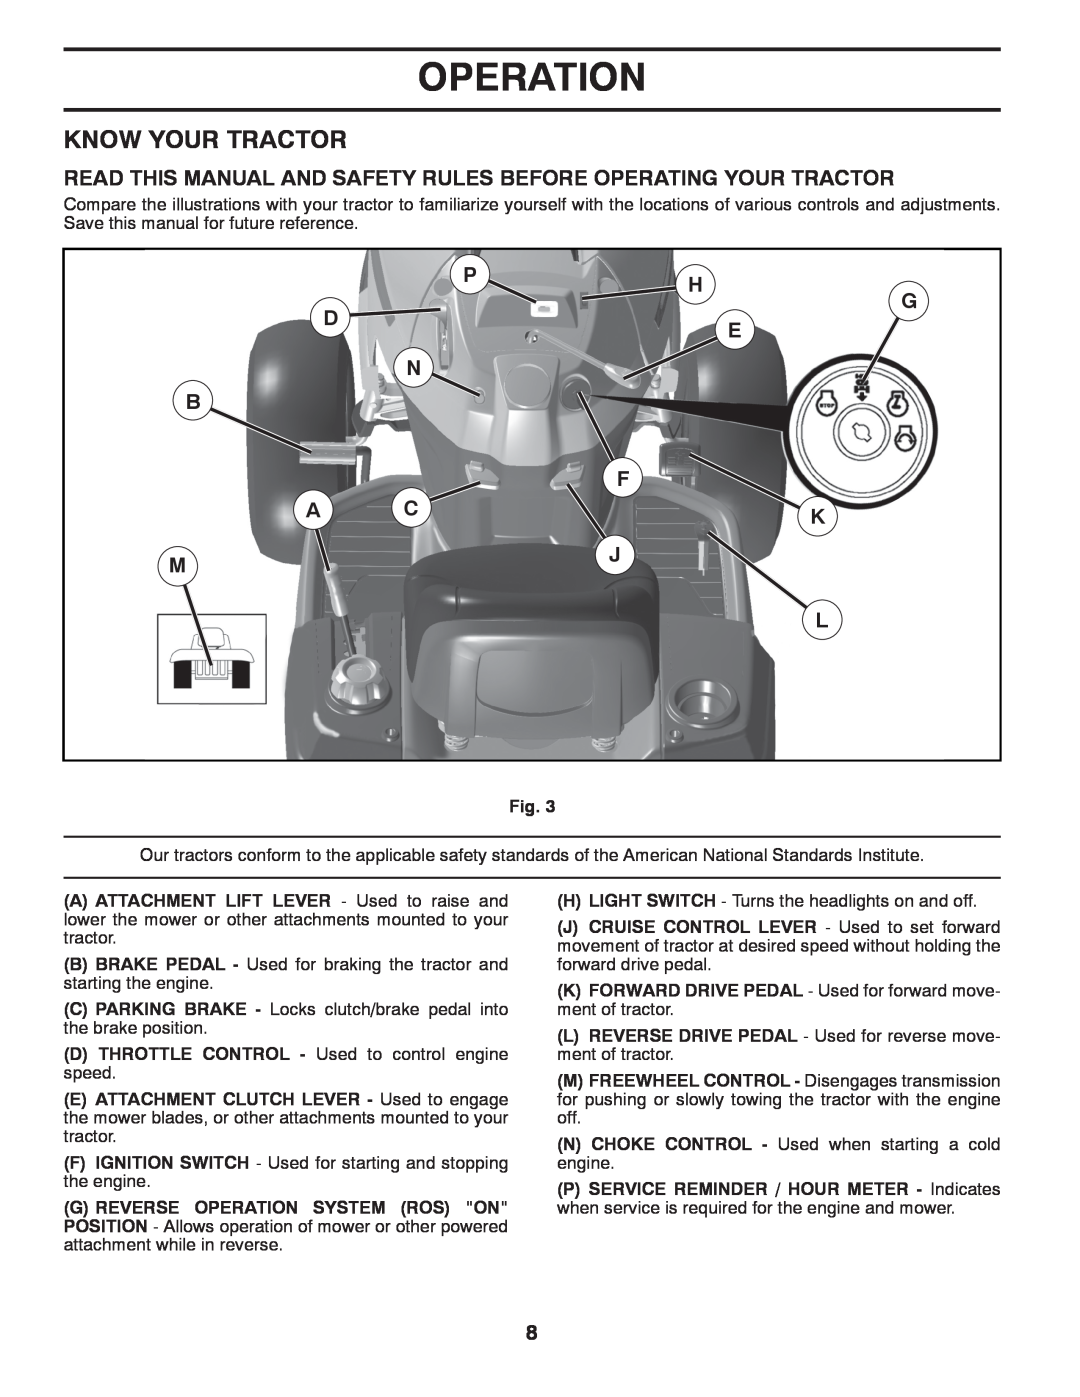 Husqvarna YTH18K46 Know Your Tractor, Read This Manual And Safety Rules Before Operating Your Tractor, Ph G De N 